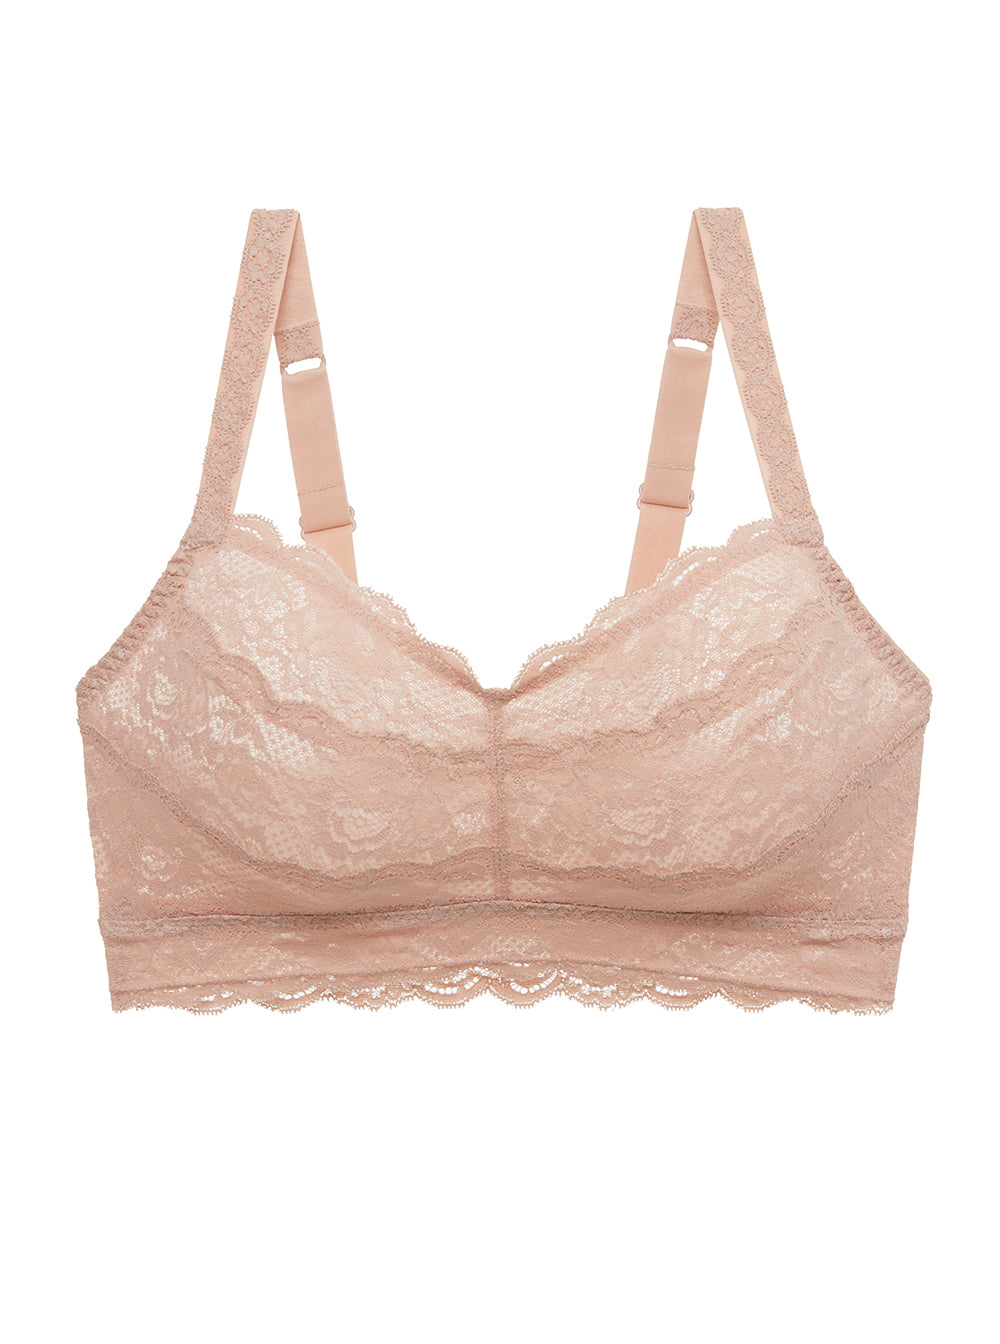 Curvy Sweetie Bralette by Cosabella at ORCHARD MILE